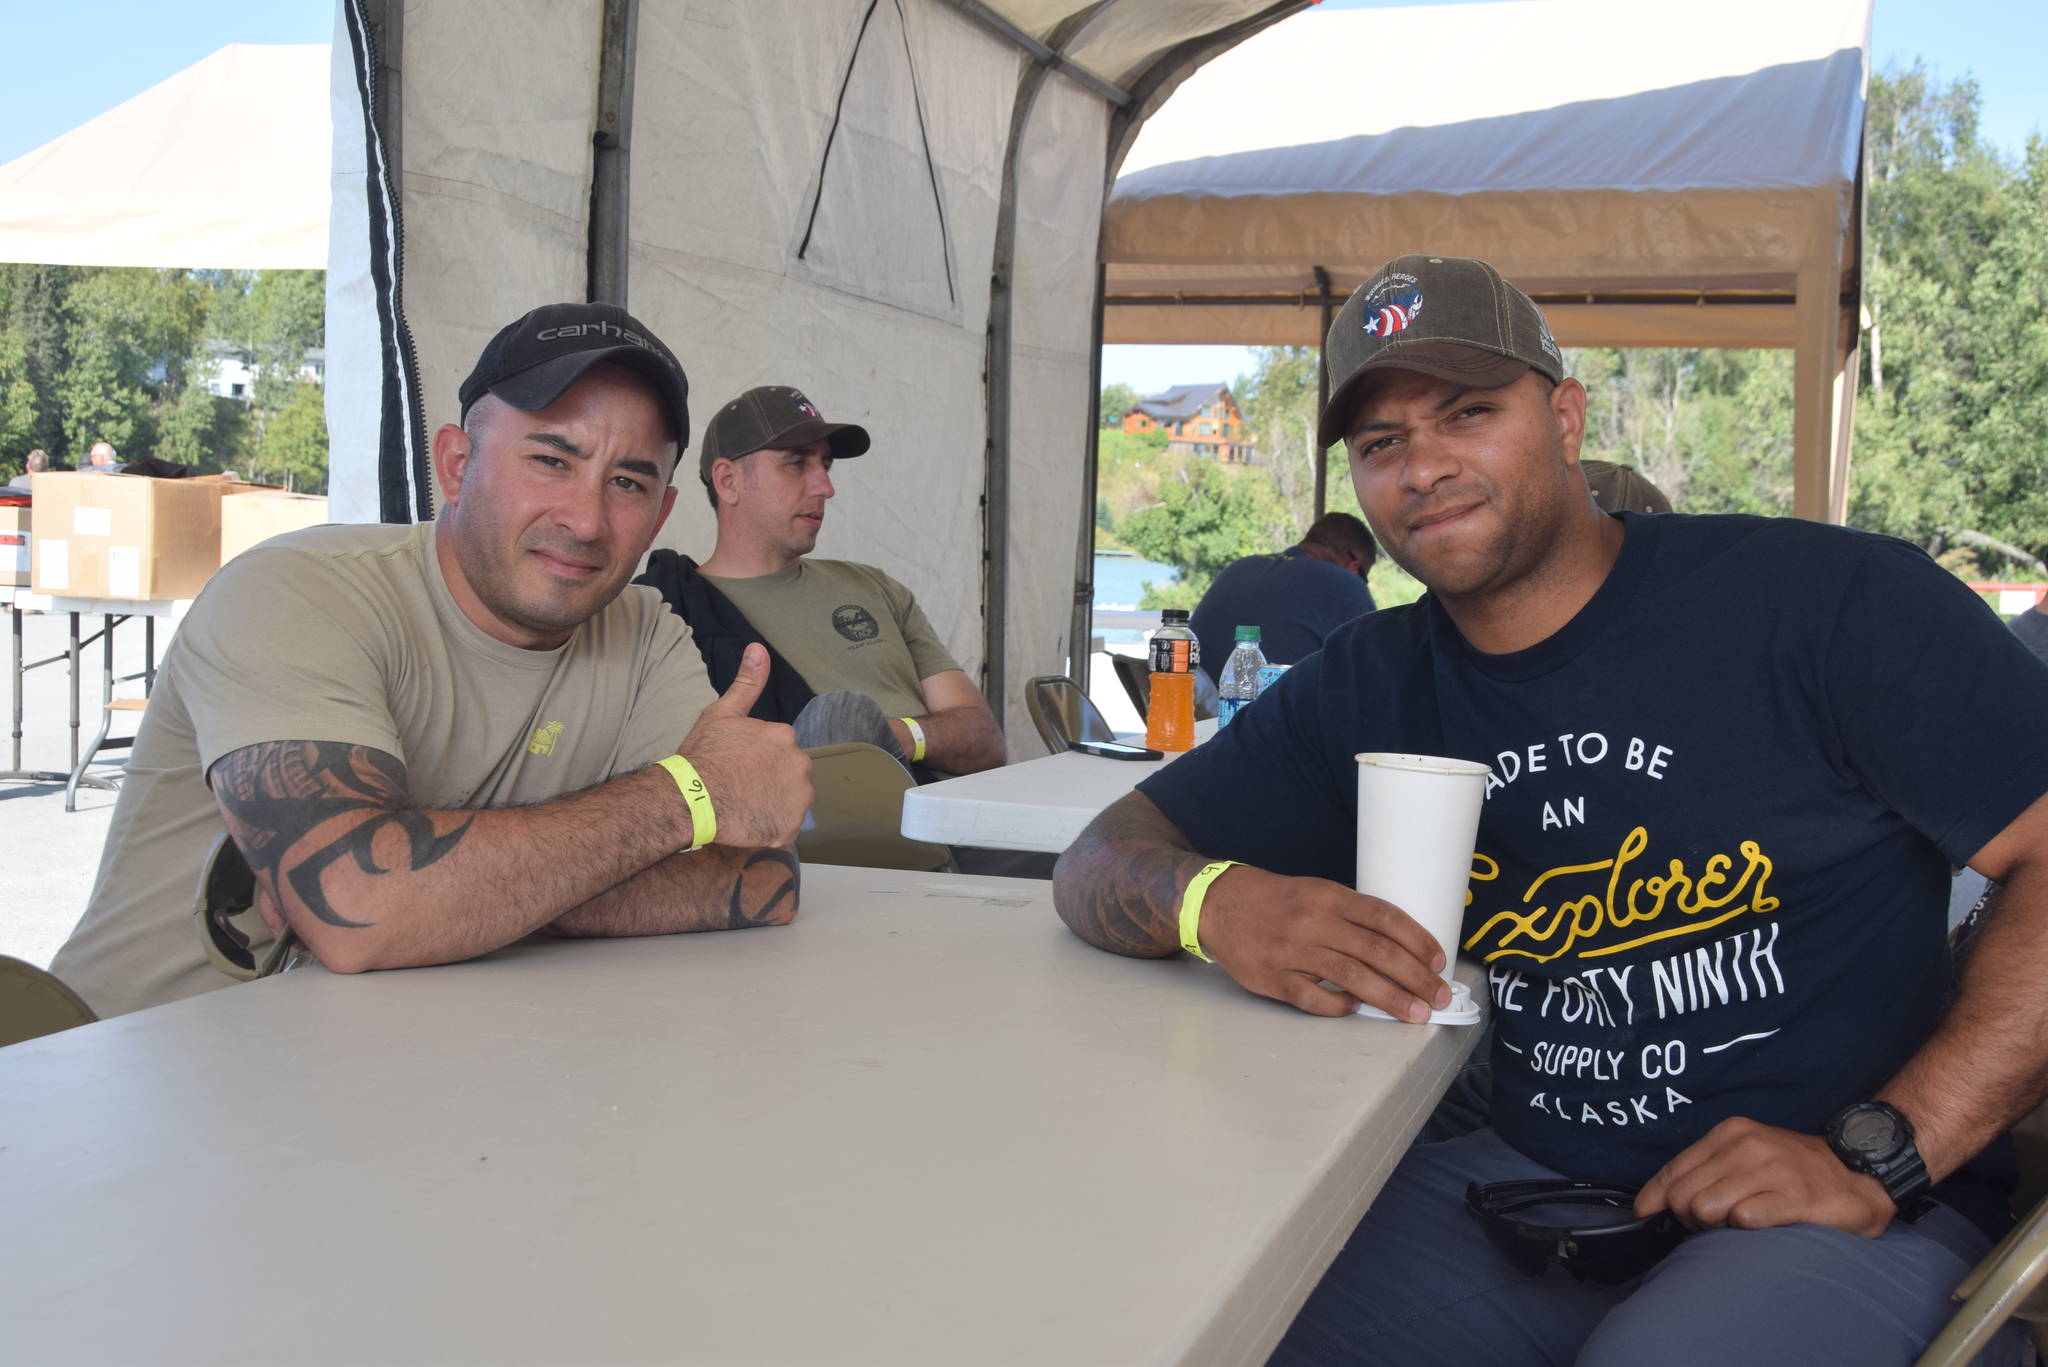 Staff Sgt. Richard Ellis and Staff Sgt. Louigy Buduan smile for the camera during the Wounded Warrior’s Fishing Trip in Centennial Park in Soldotna, Alaska on Aug. 9, 2019. (Photo by Brian Mazurek)